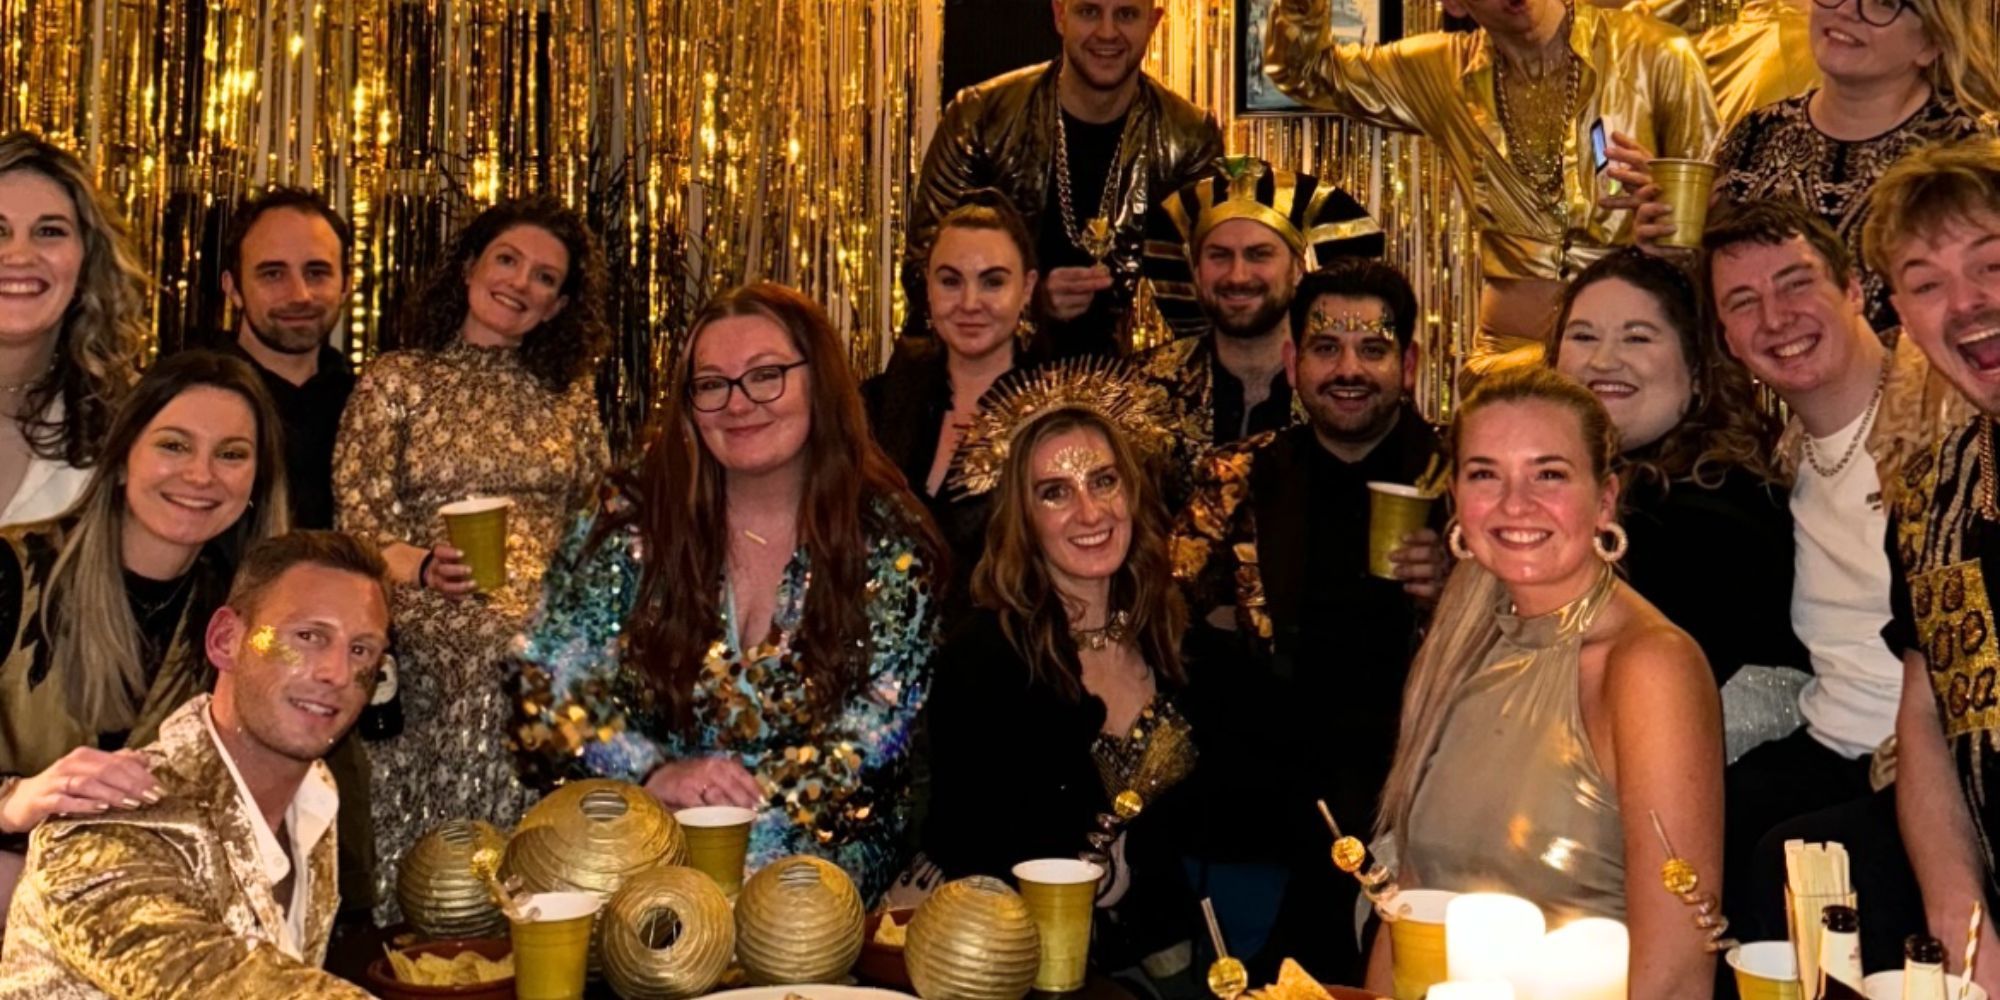 Fraser Olender and Daisy Kelliher from Below Deck posing in gold outfits for New Year's Eve